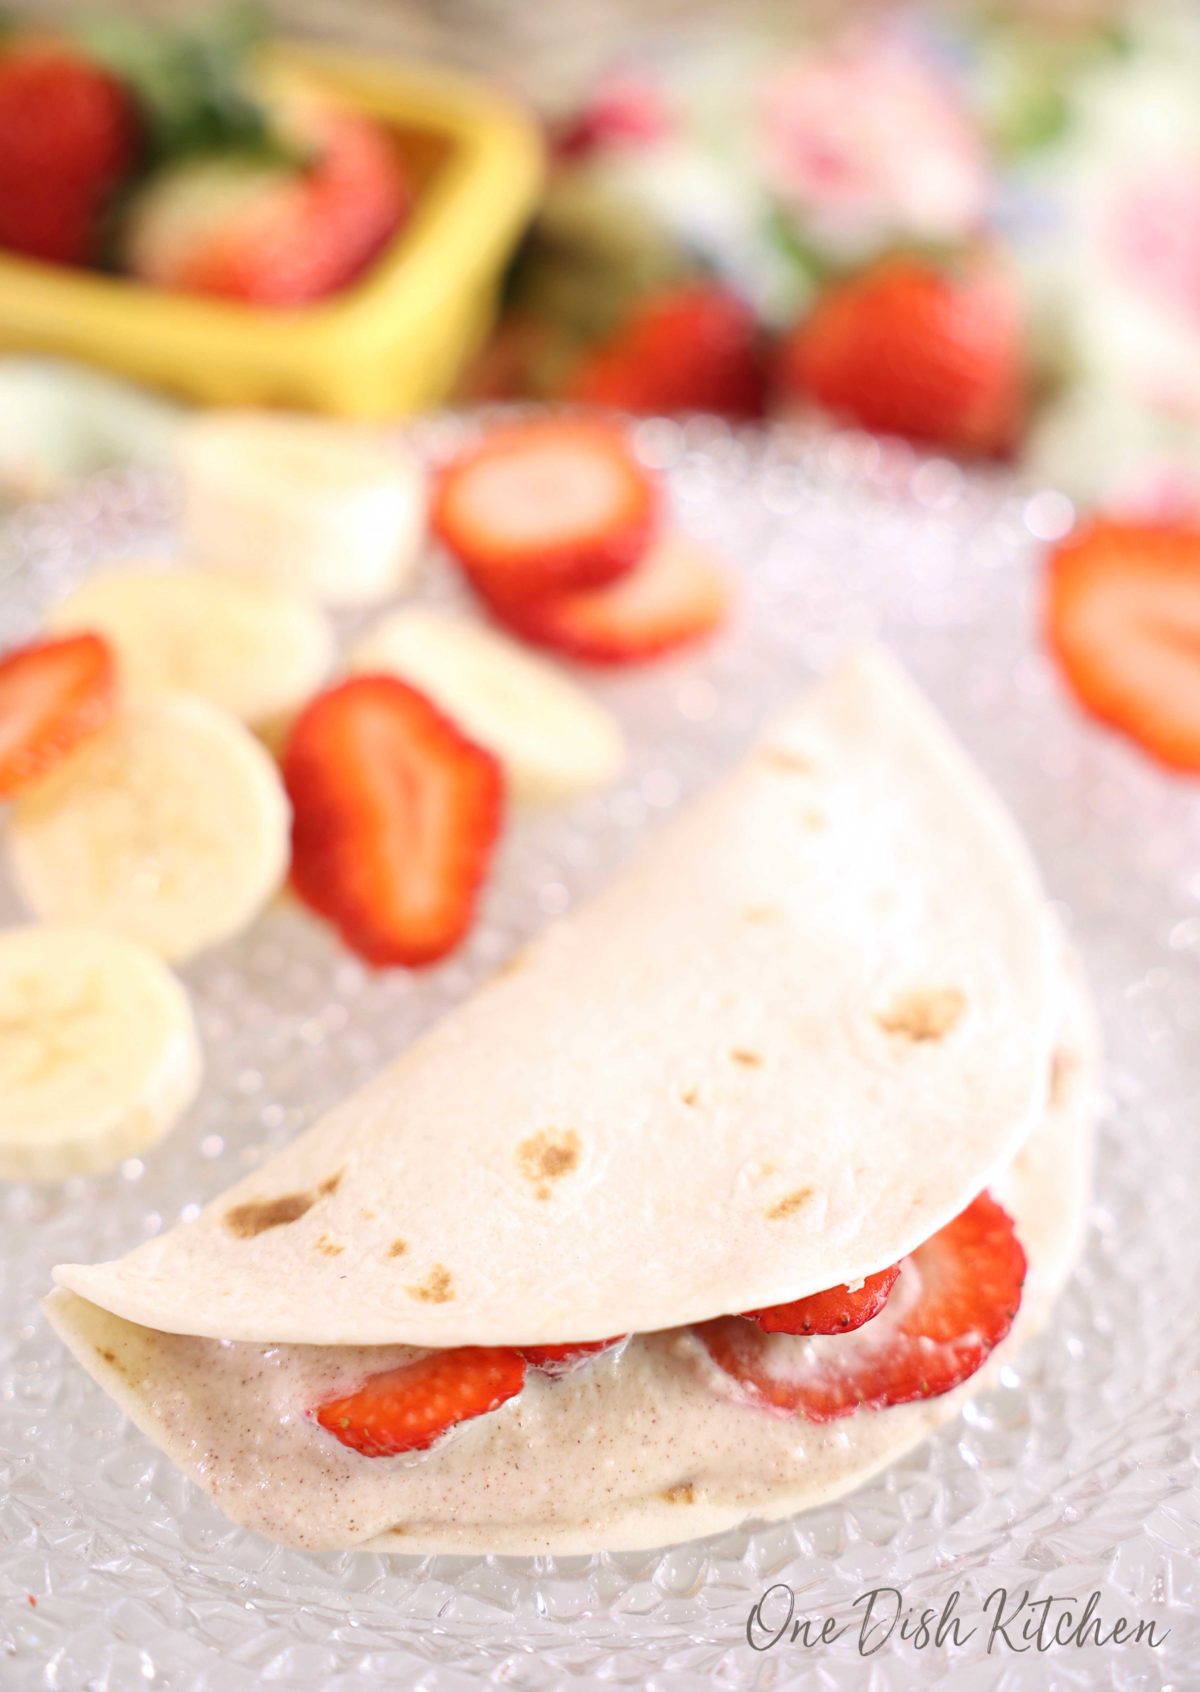 one tortilla folded over and filled with strawberries on a plate with sliced bananas and strawberries surrounding it.